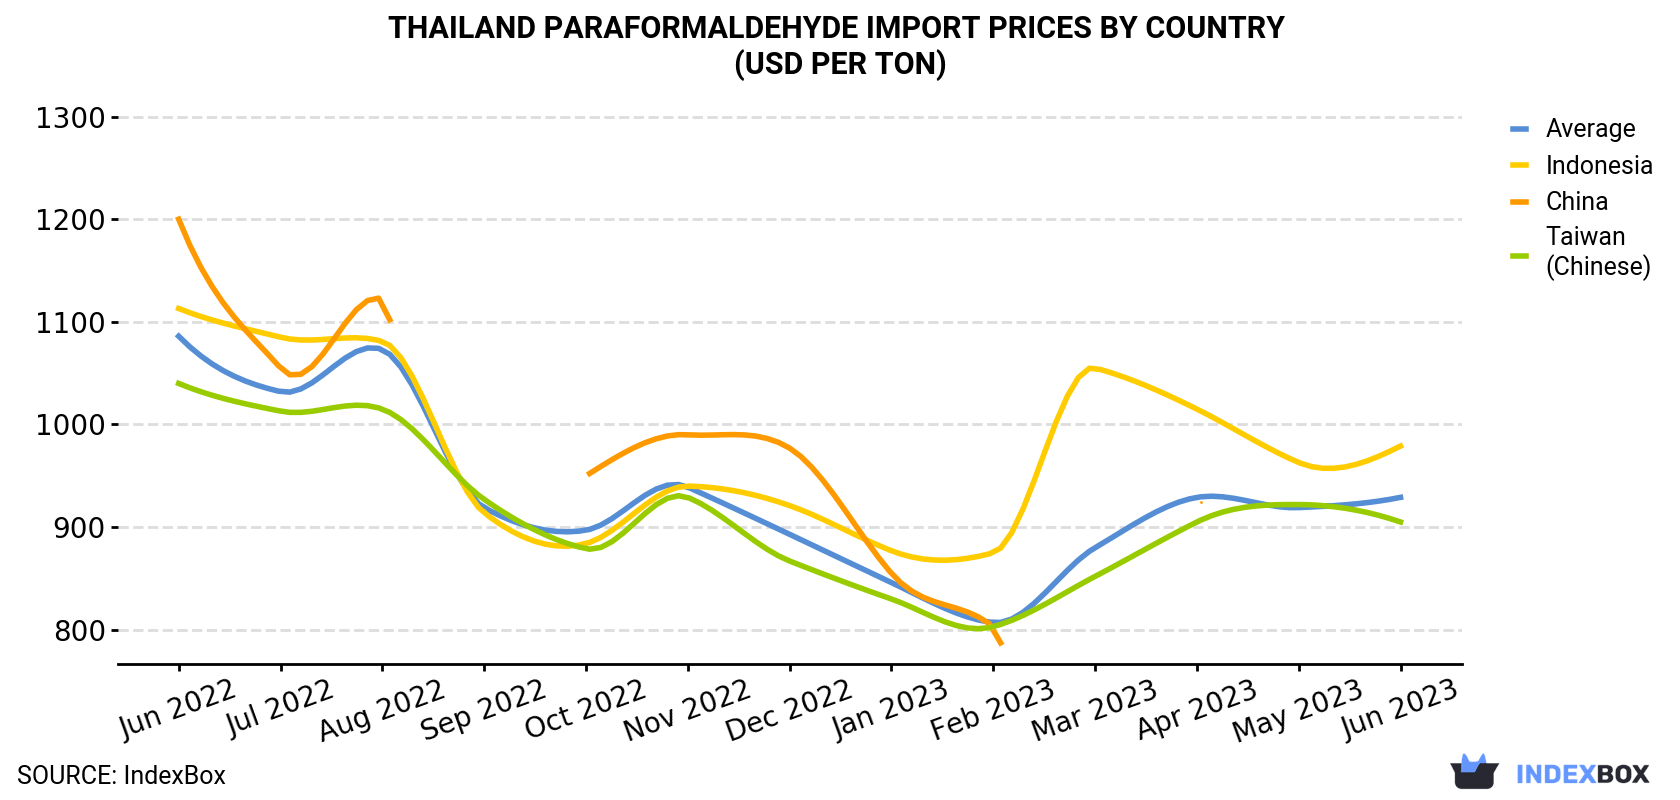 Thailand Paraformaldehyde Import Prices By Country (USD Per Ton)